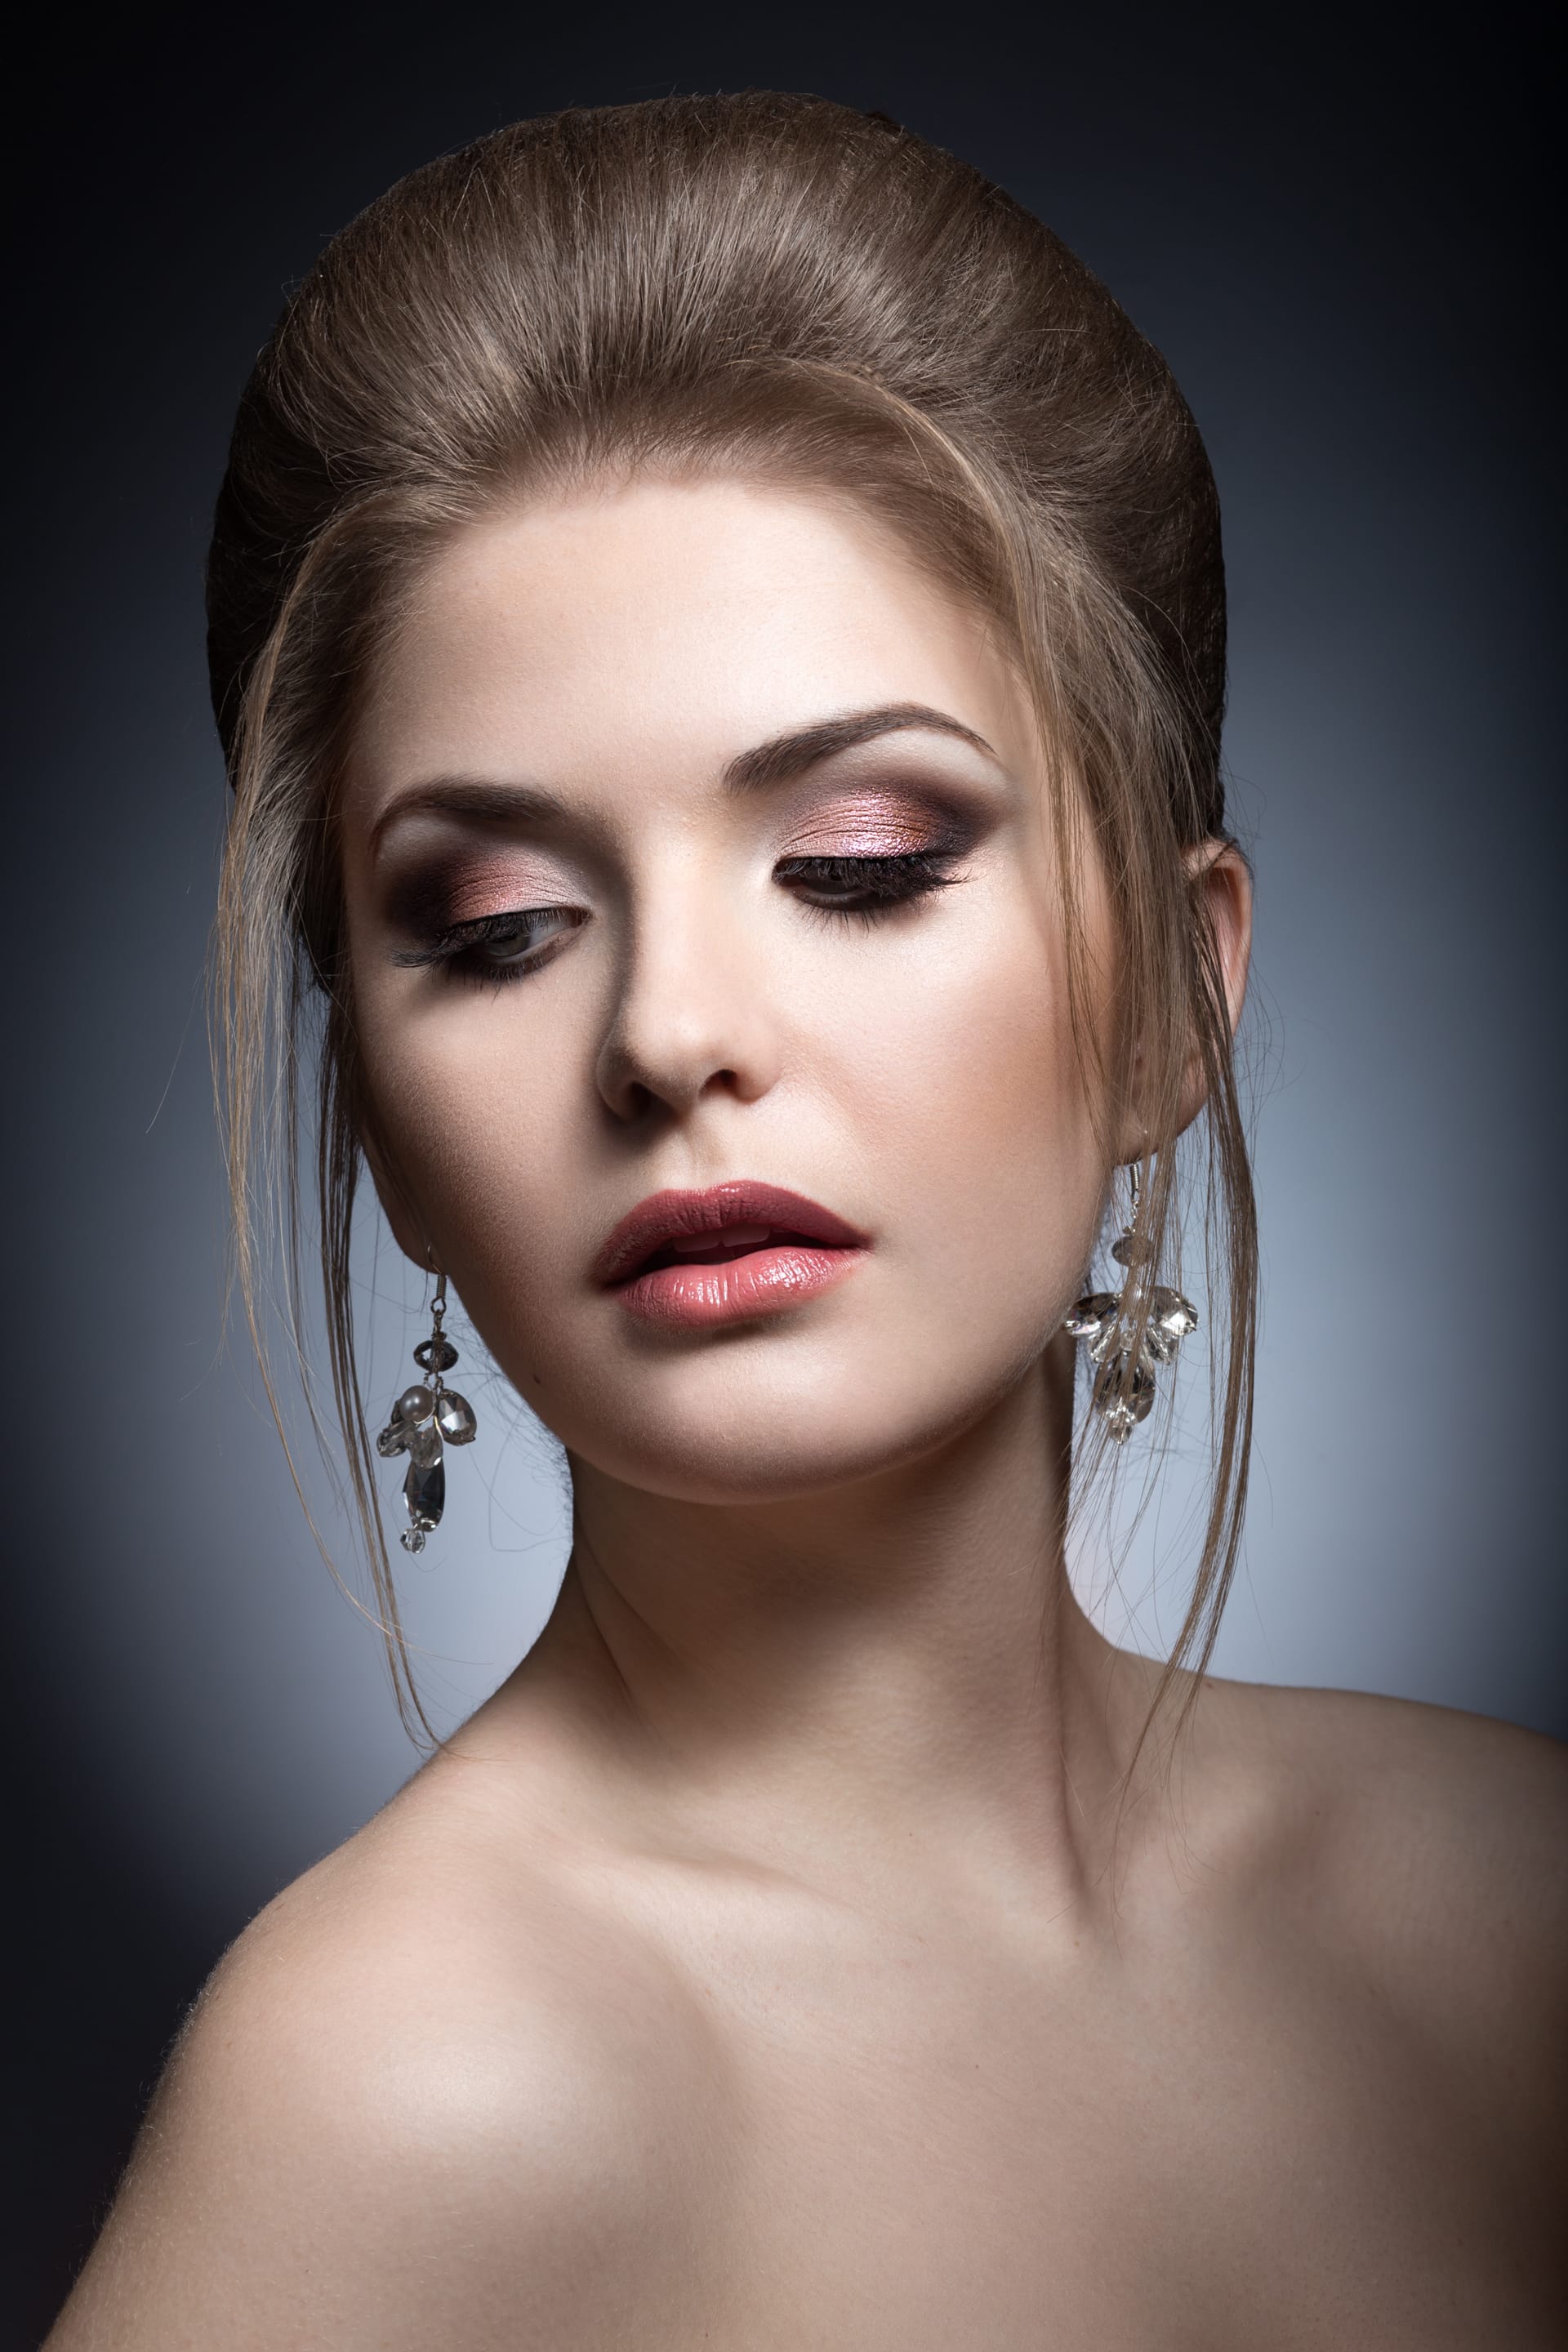 Portrait young woman with elegant hairstyle image aesthetic profile pics